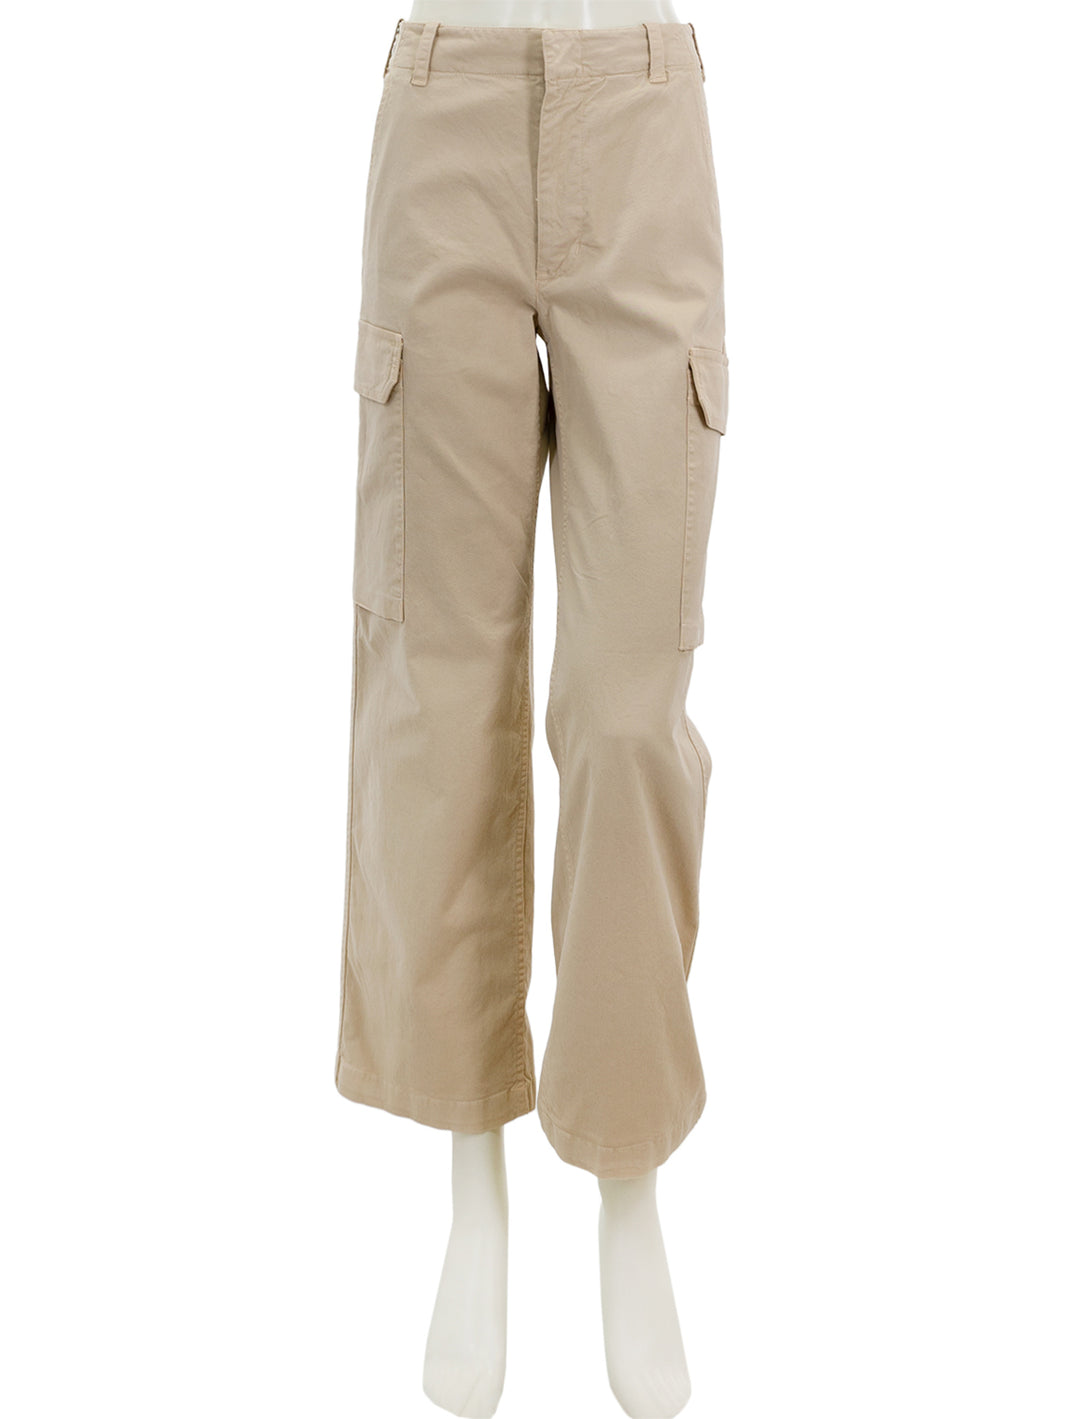 Front view of Nili Lotan's leofred cargo pant in sandstone.